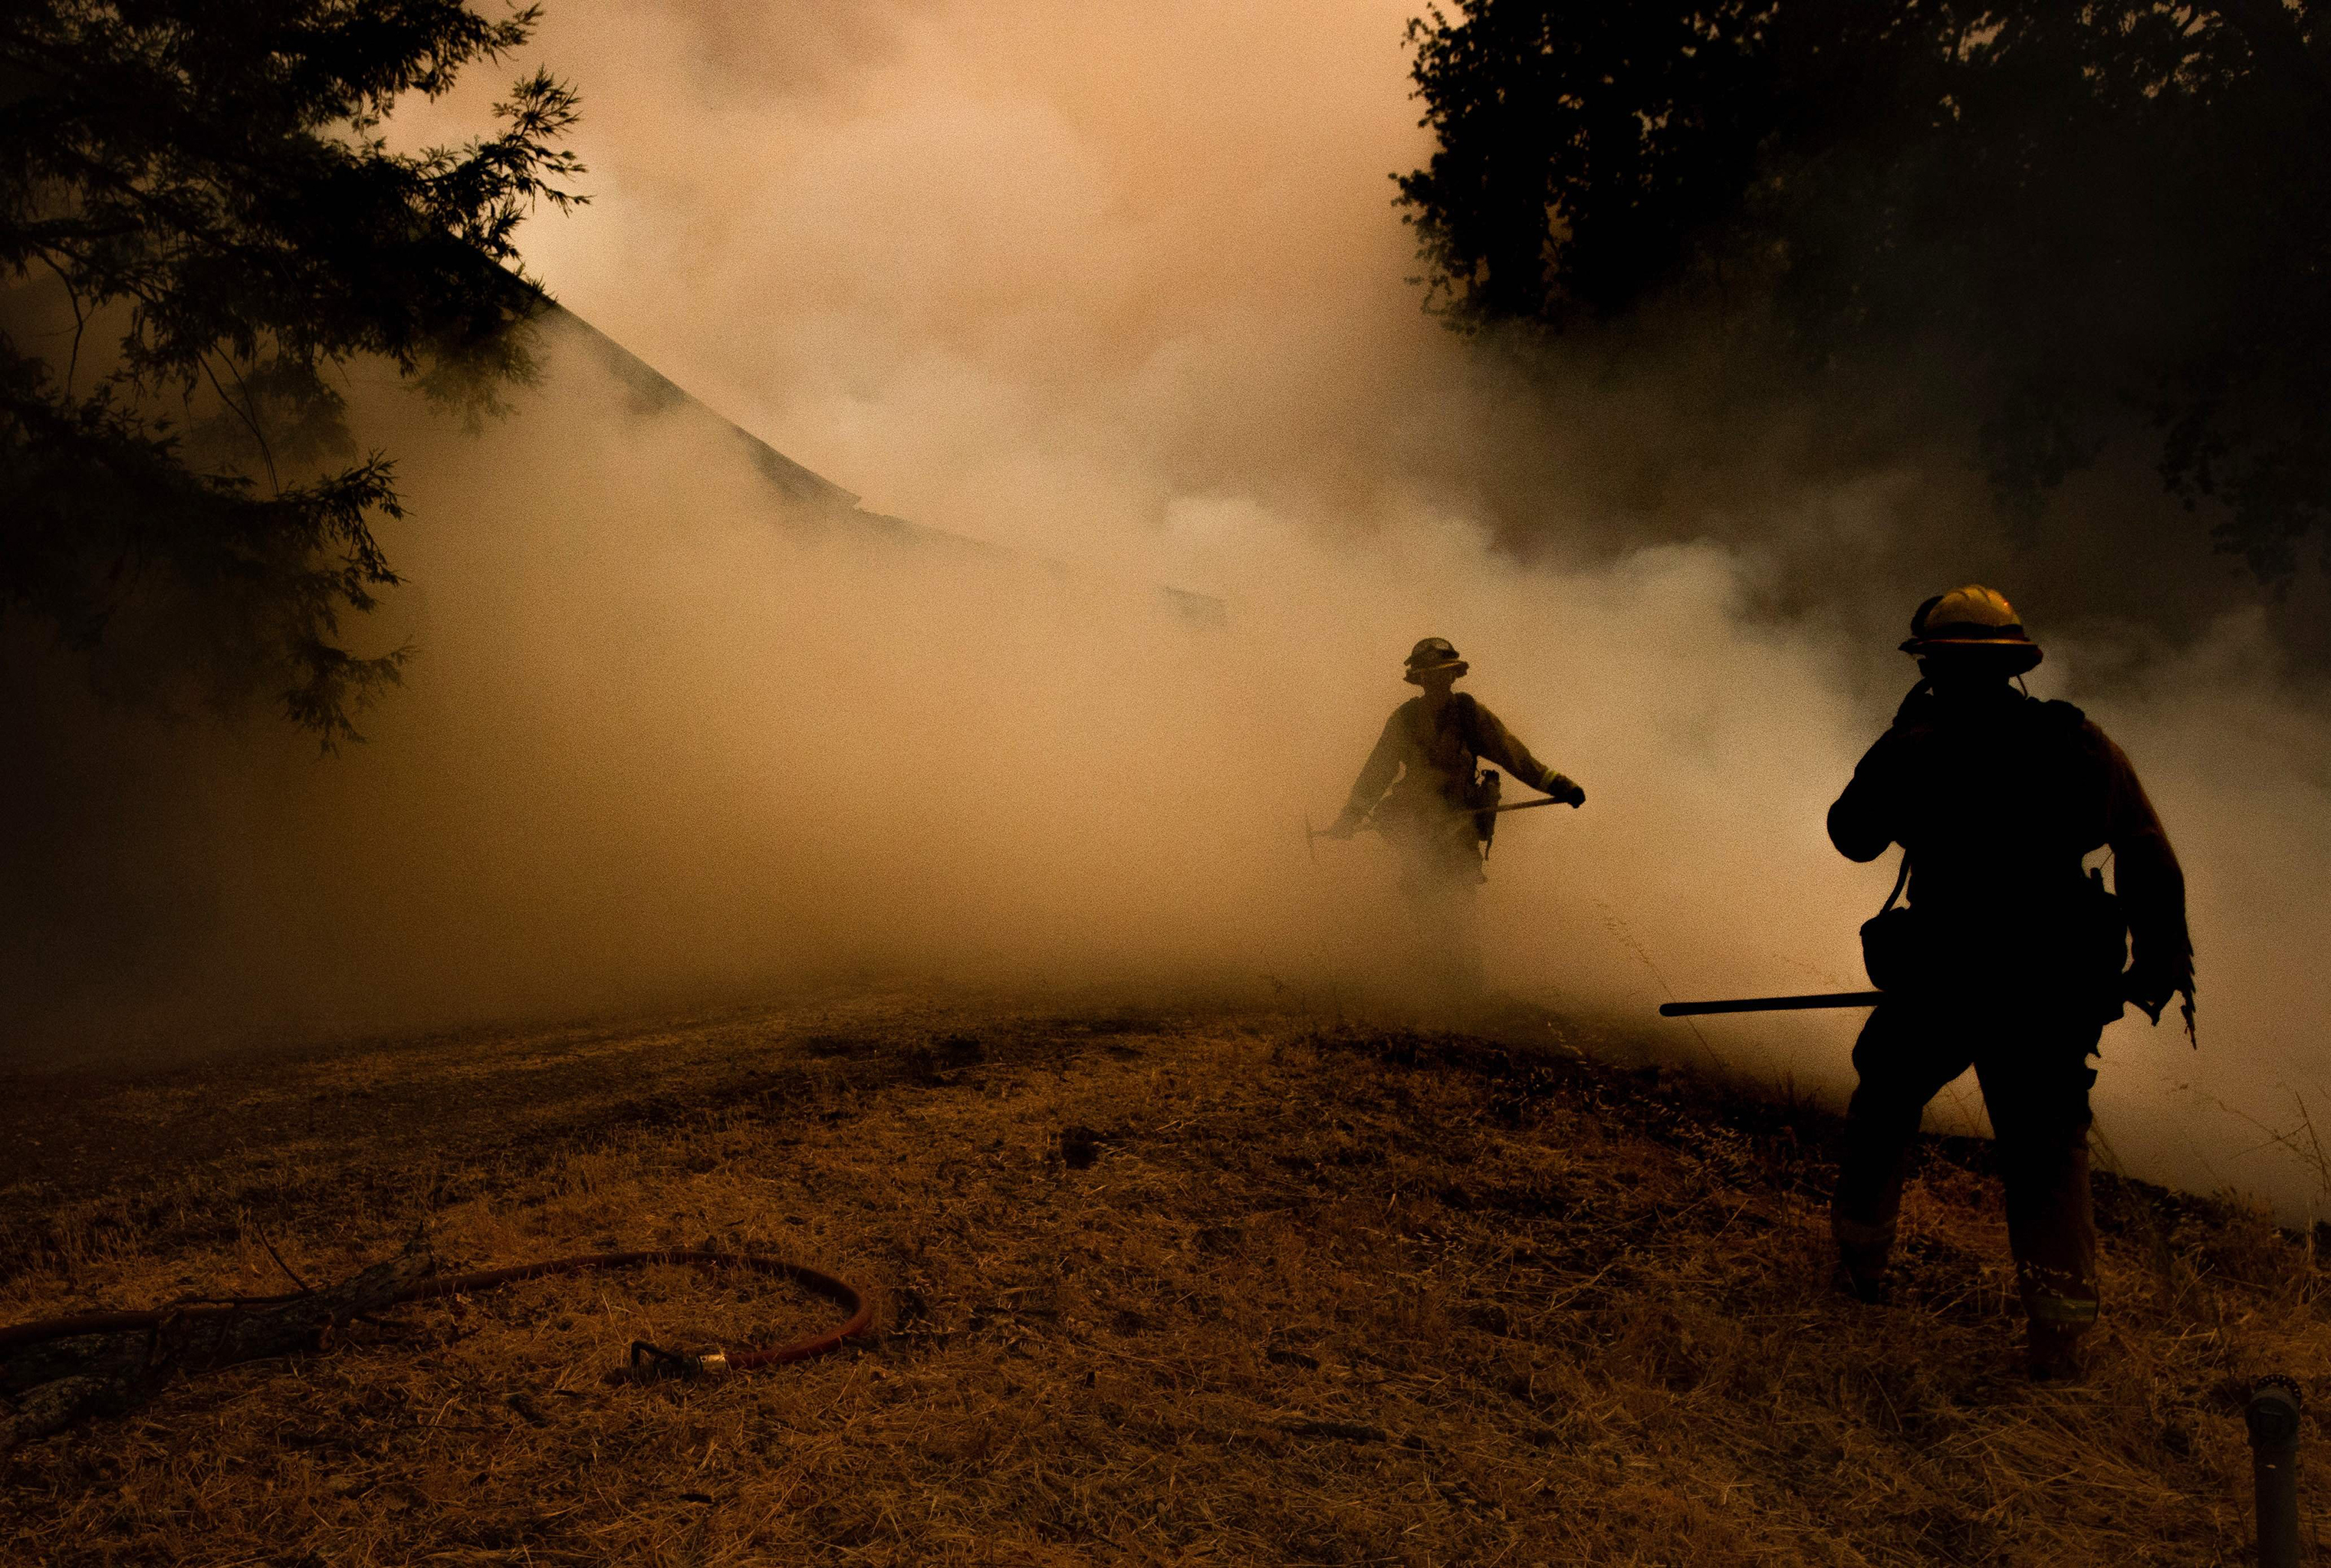 A firefighter walks through smoke as flames approach a home during the Mendocino Complex fire in Lakeport, Calif. on July 30. (Josh Edelson—AFP/Getty Images)